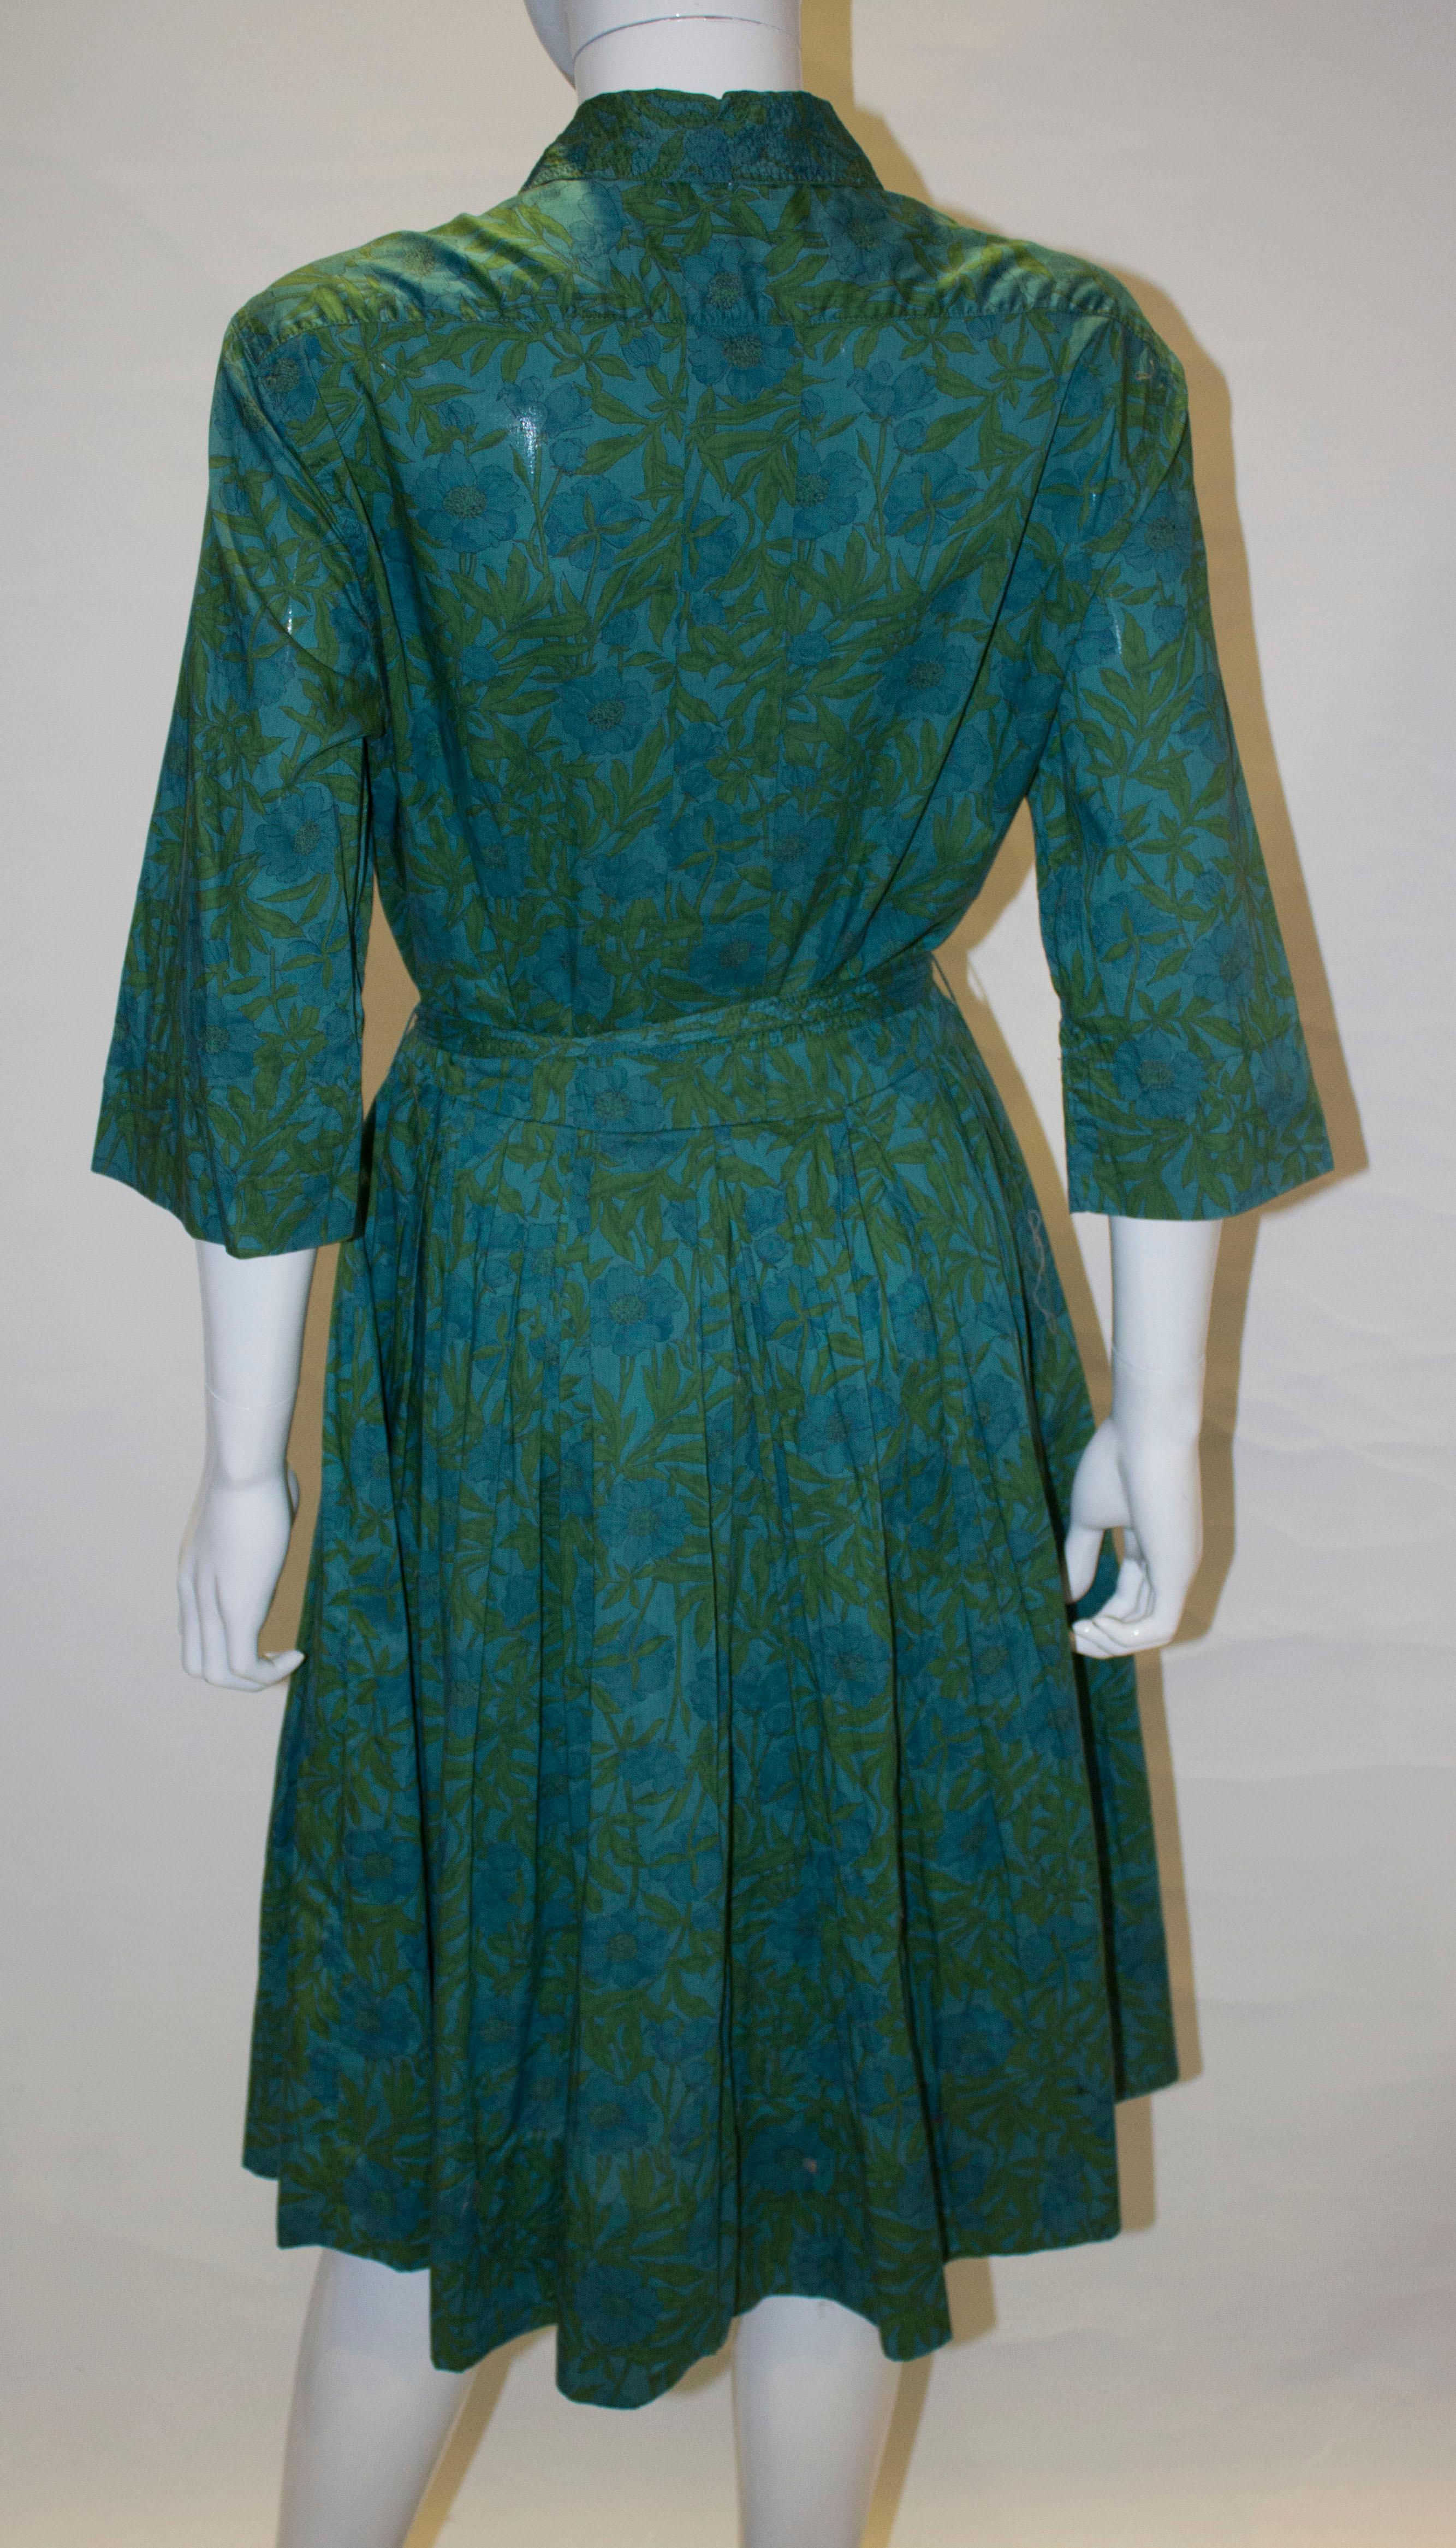 Women's Vintage Dress by Best and Co, 5th Avenue For Sale